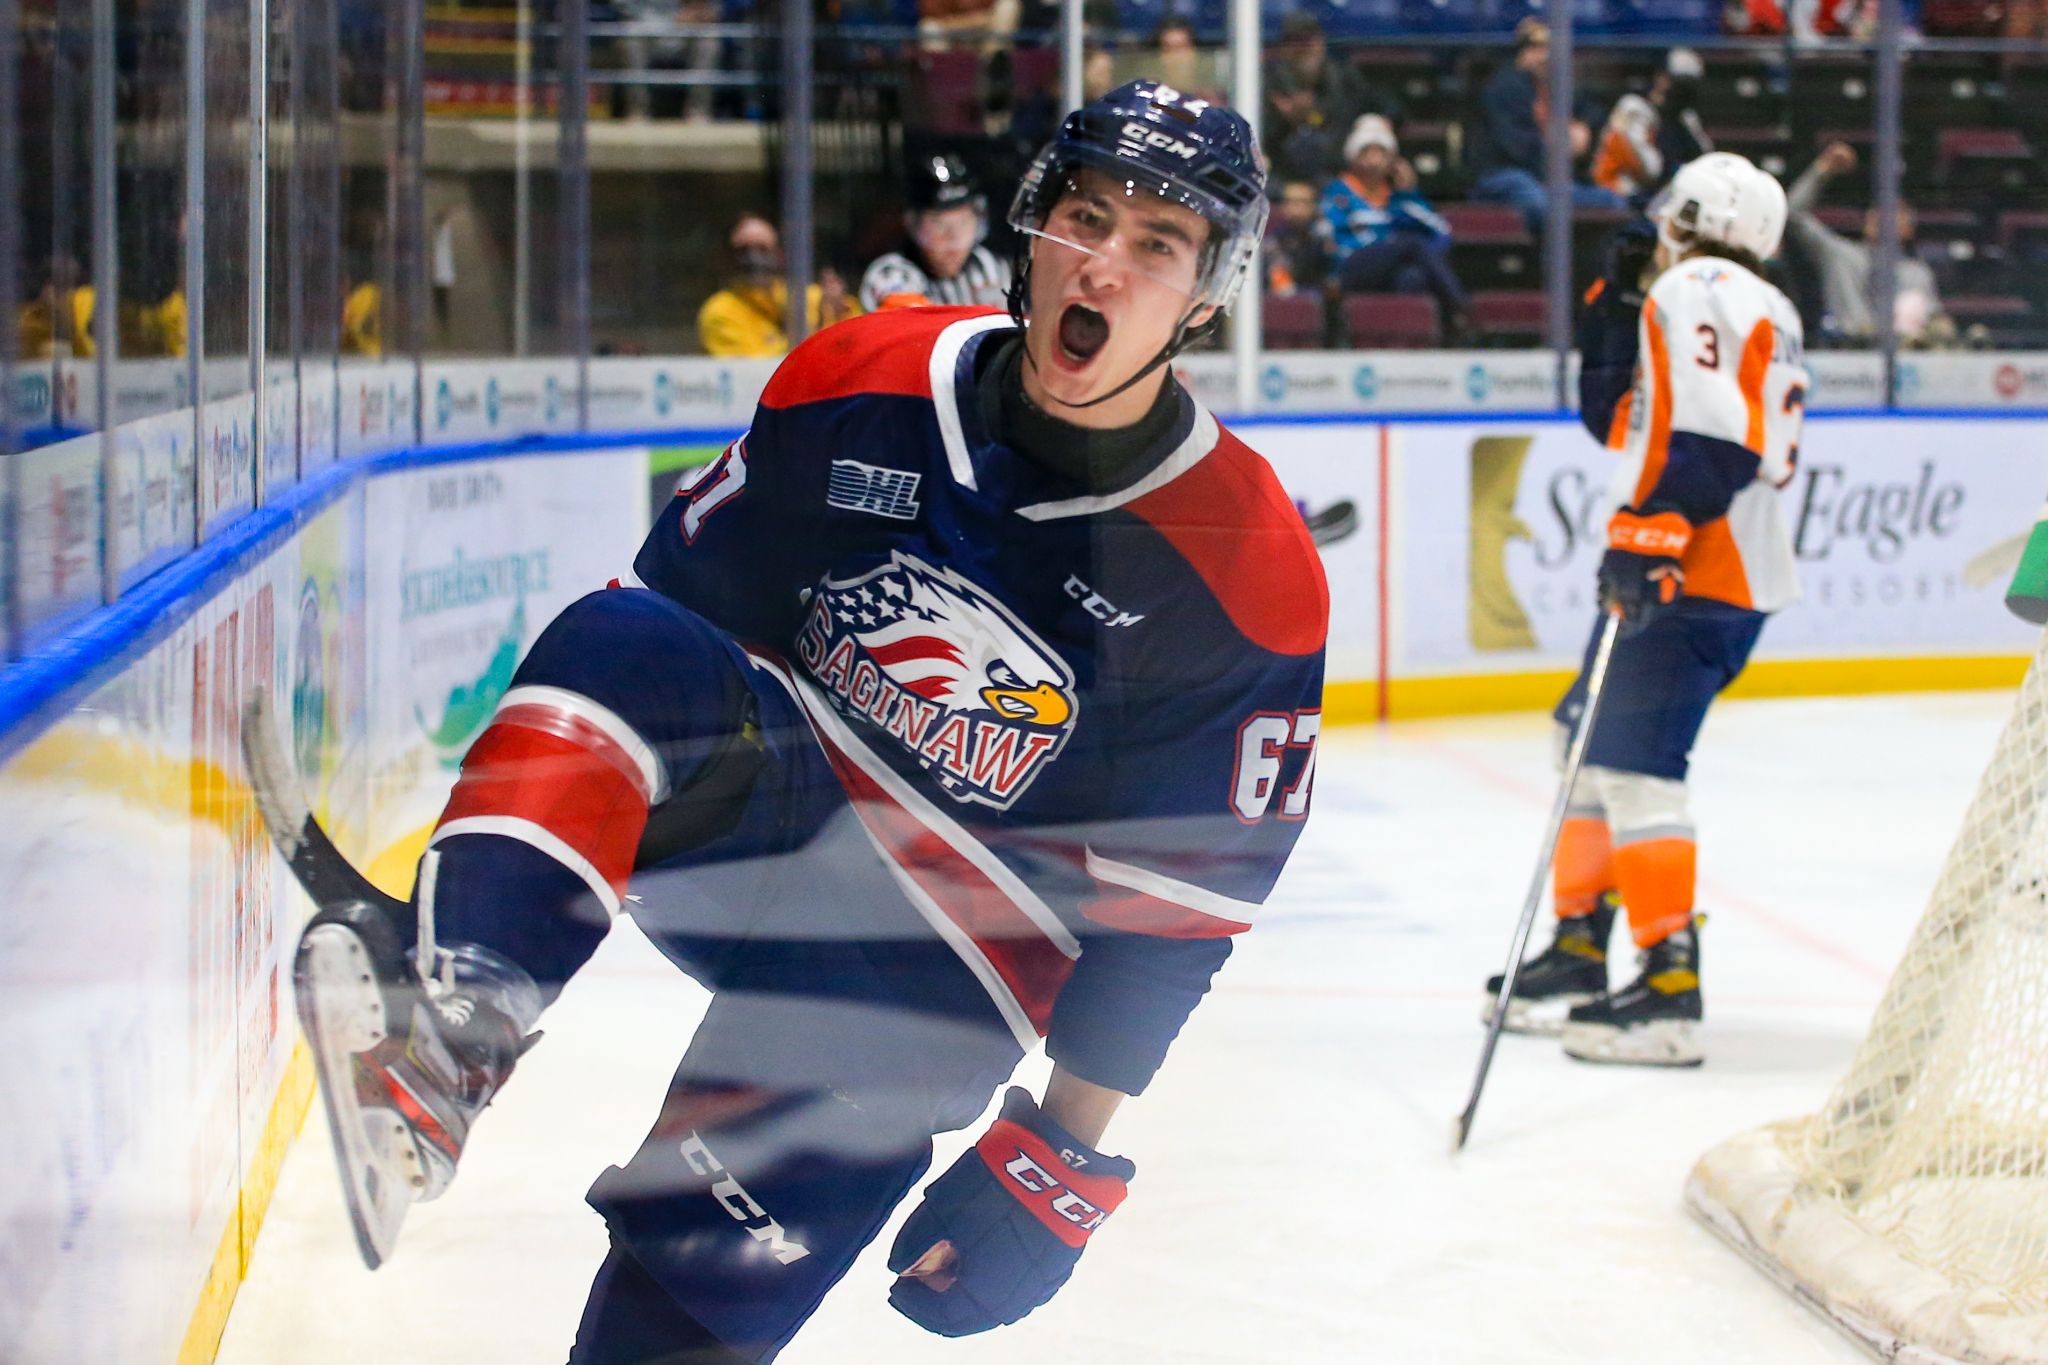 Saginaw Spirit President and Managing Partner Craig Goslin is thrilled to have the Ontario Hockey League team play a game in Midland for the first time.